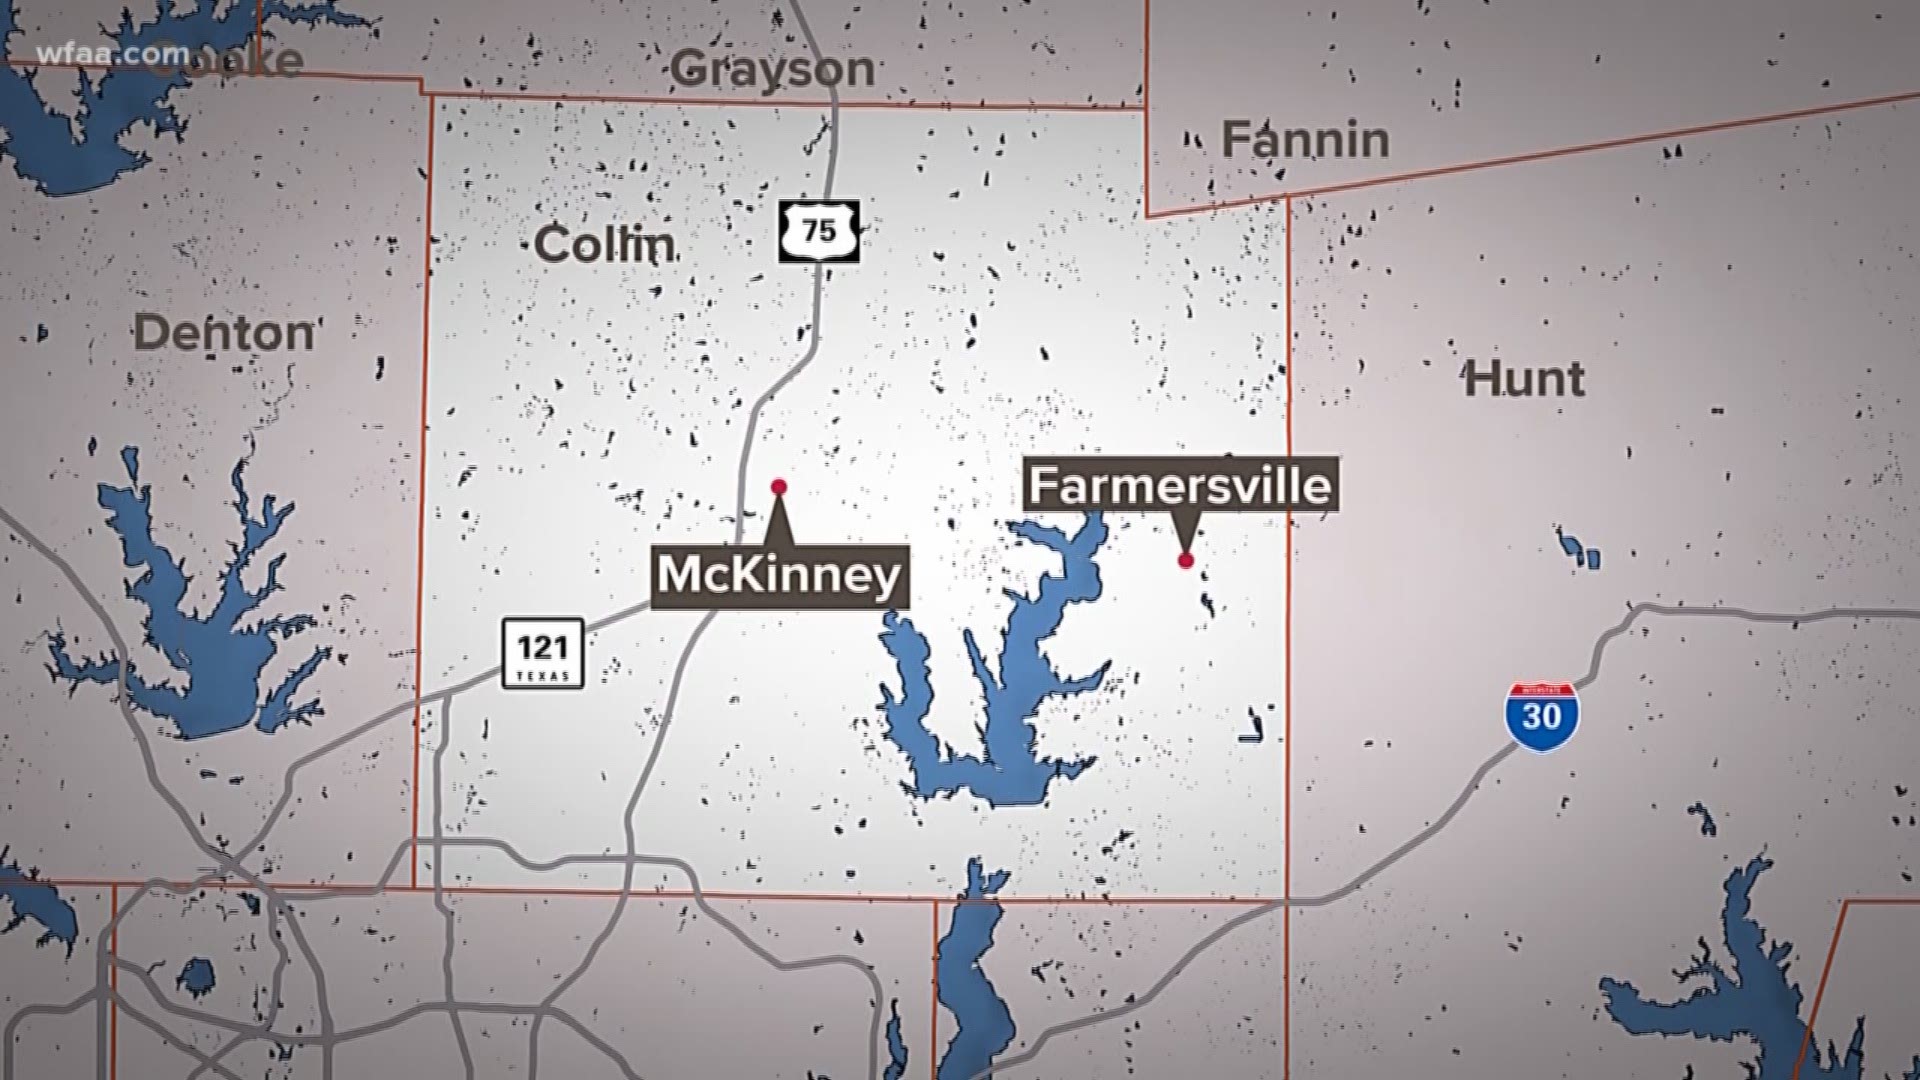 The fire happened overnight Monday in Farmersville.